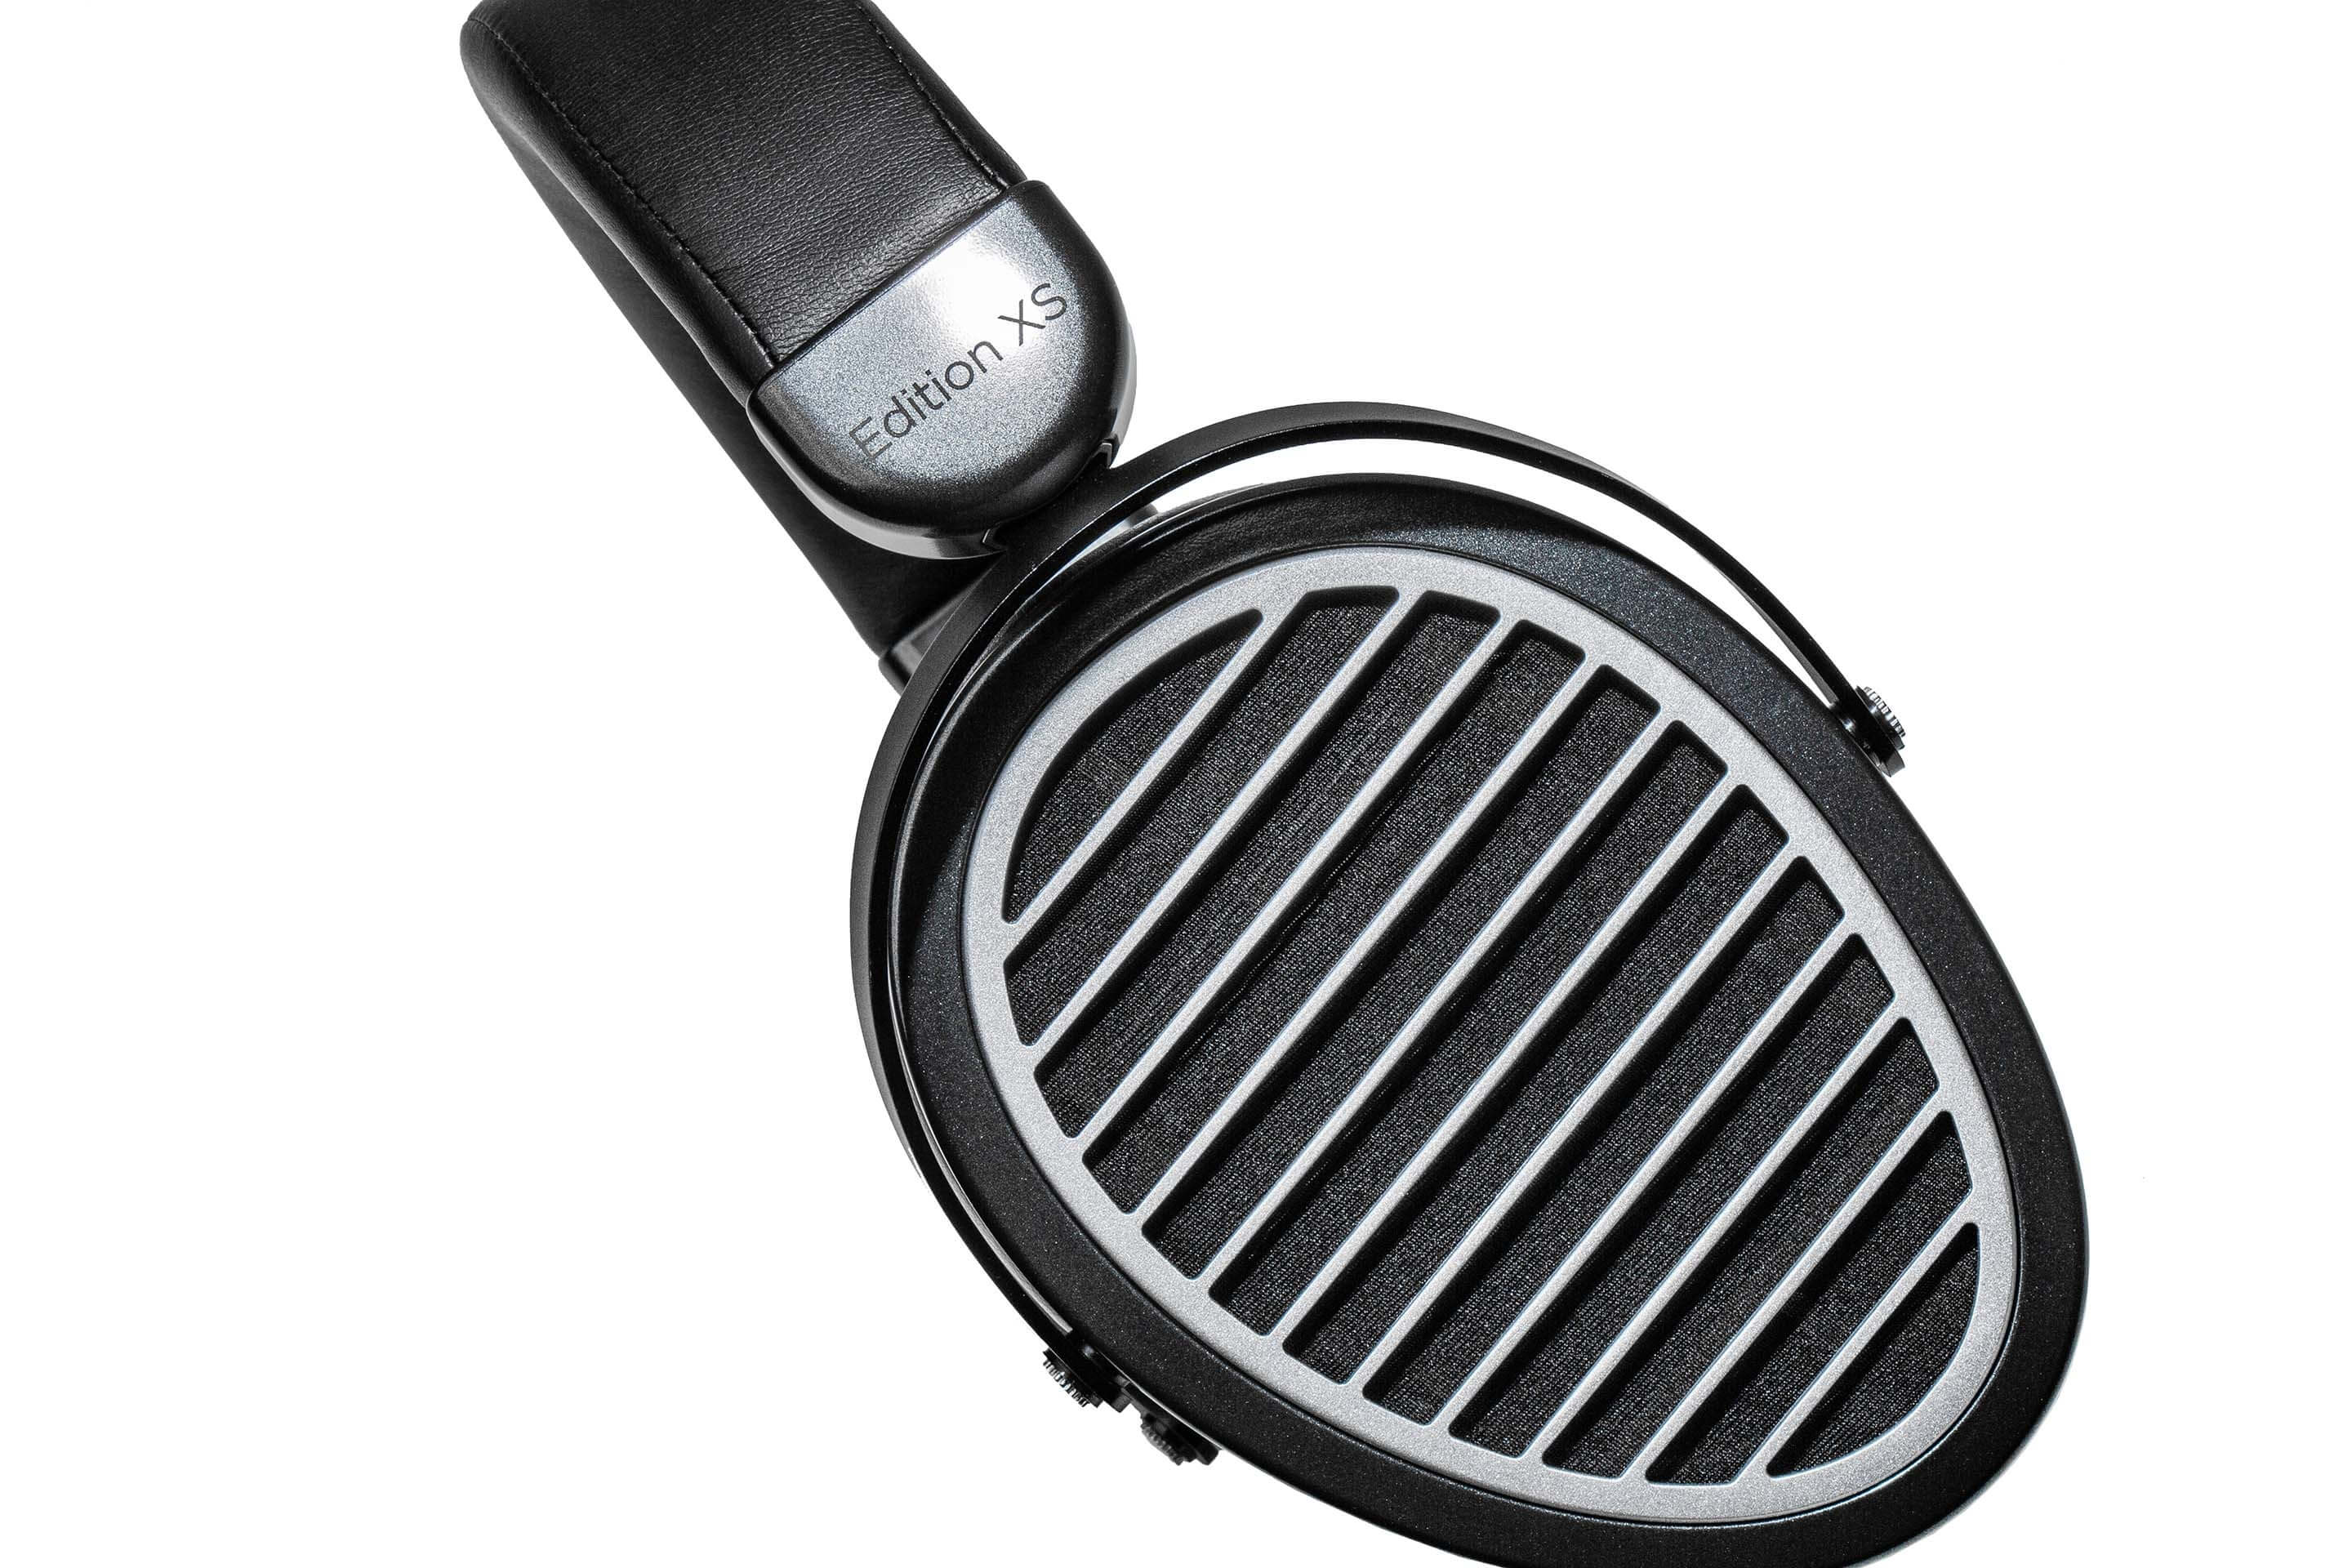 Buy HiFiMAN Edition XS Over Ear Headphone at HiFiNage in India with warranty.